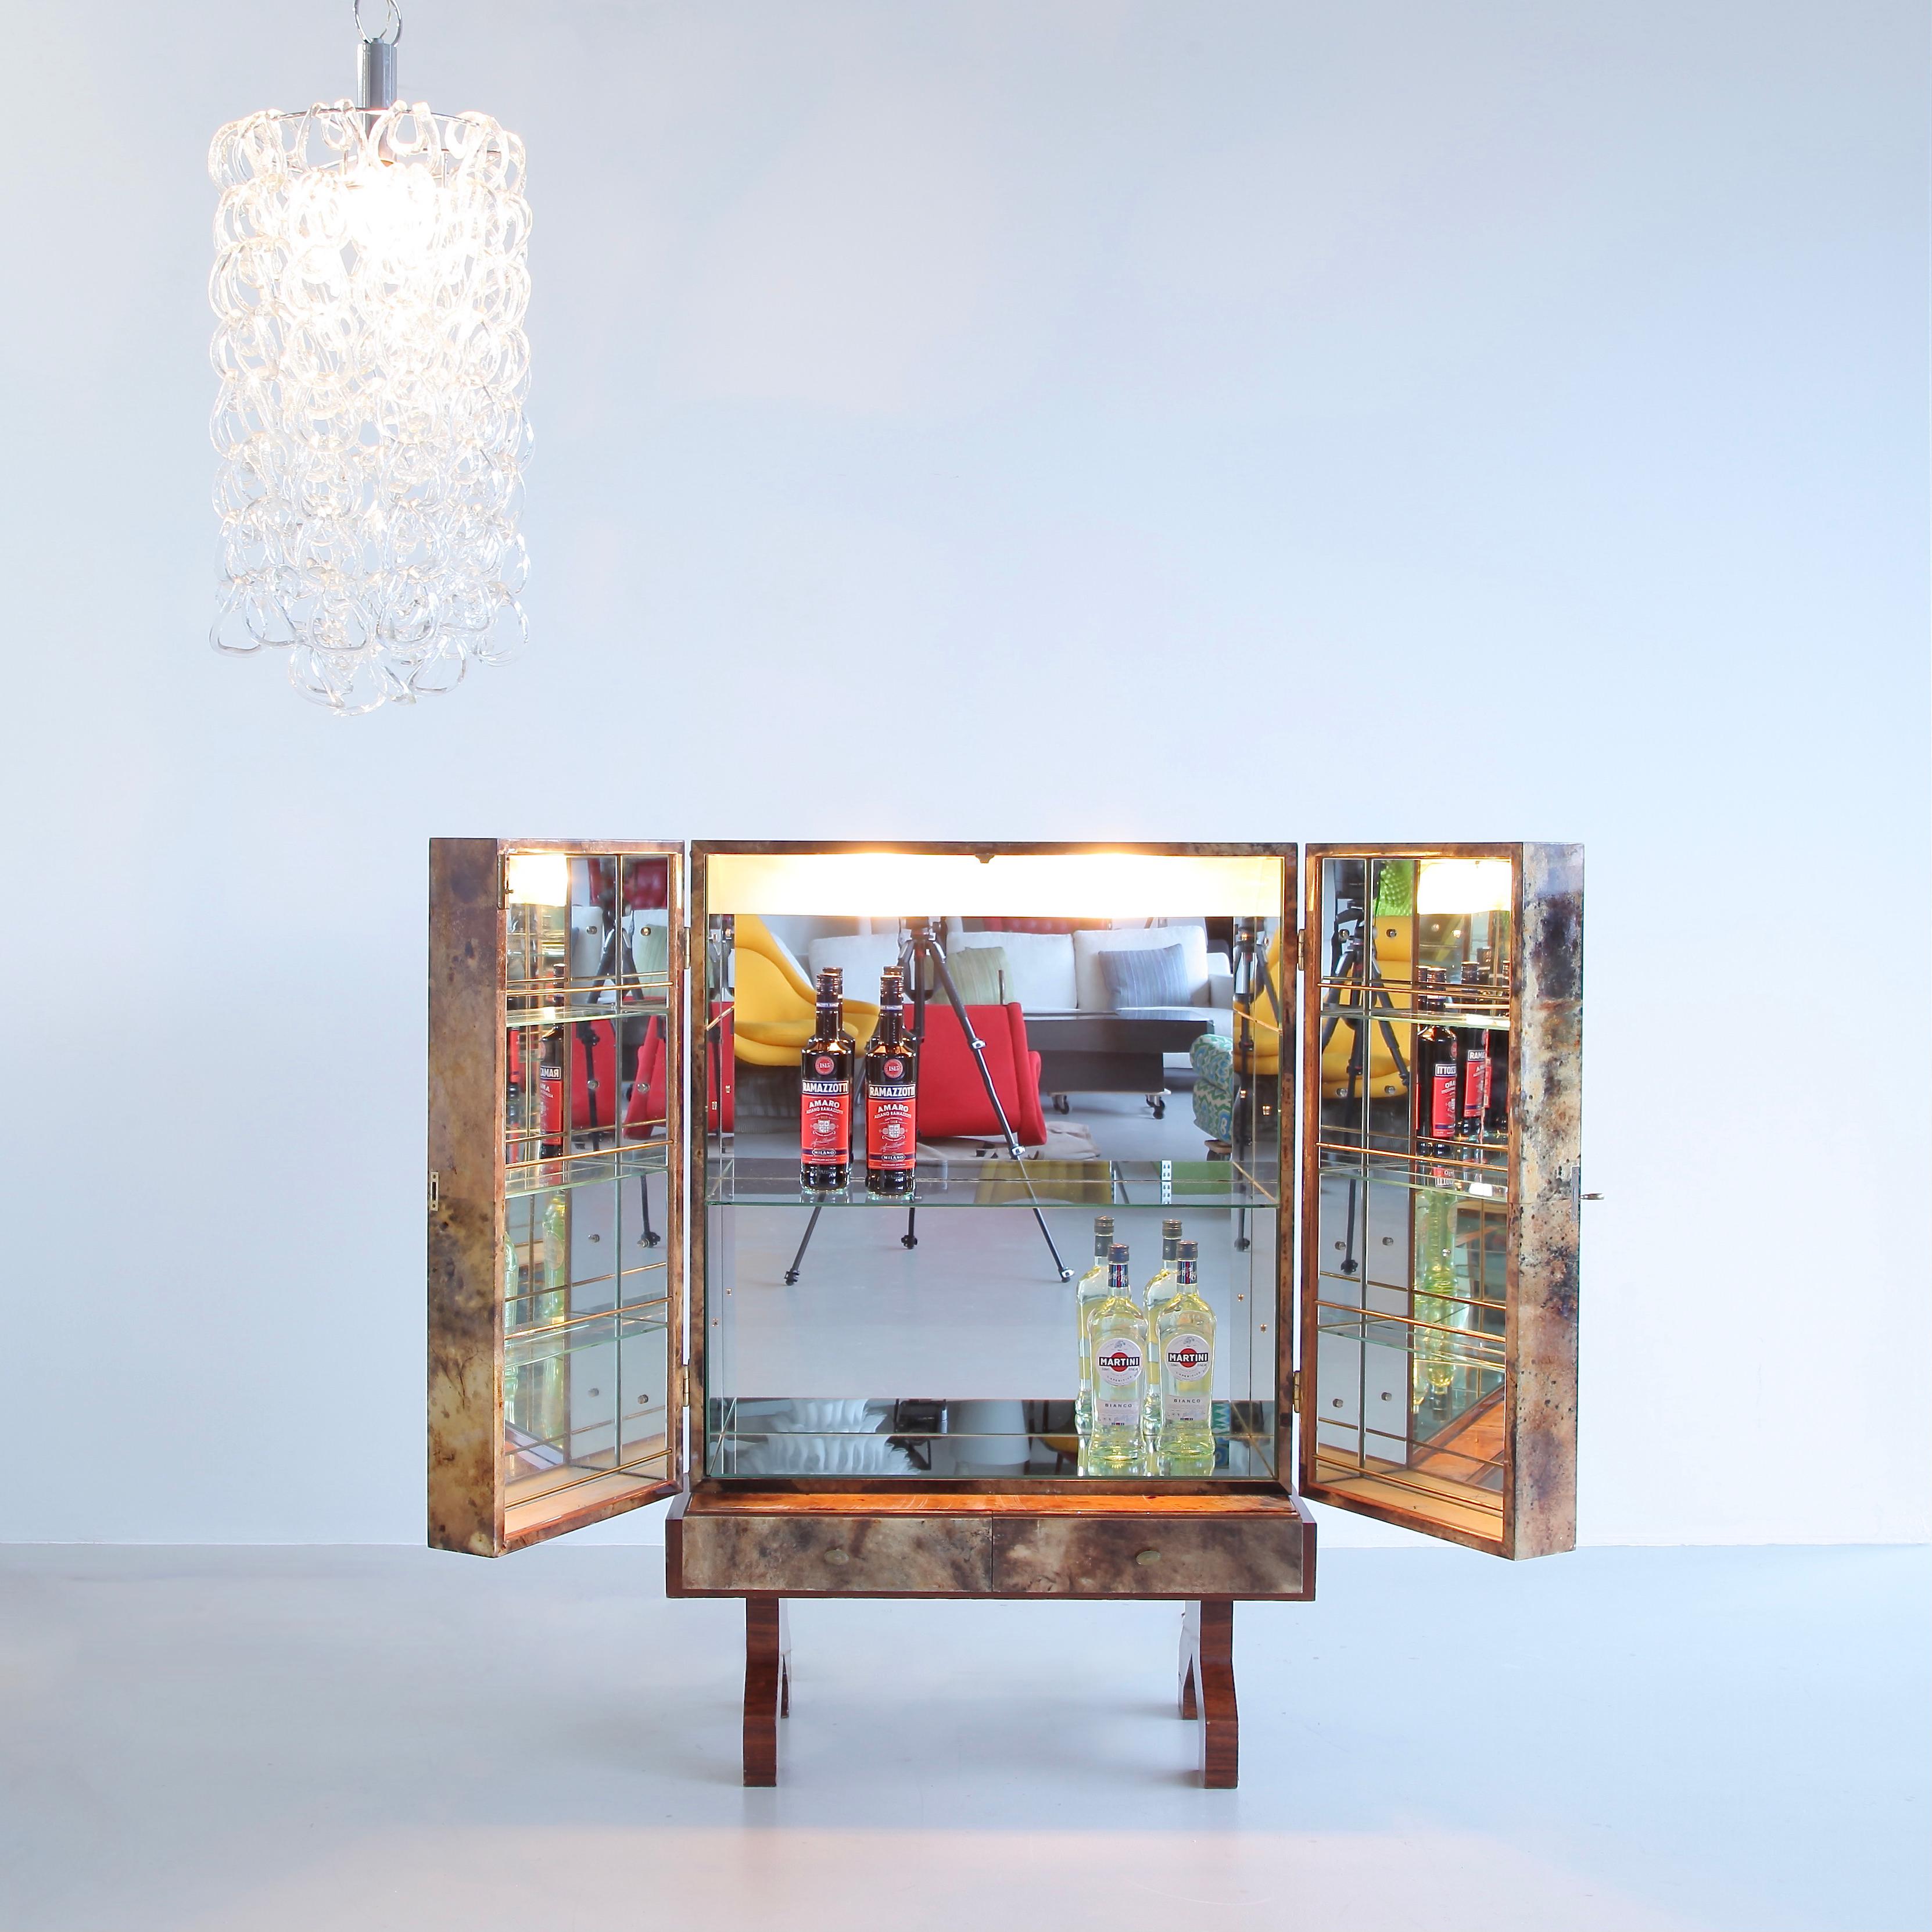 Early dry bar designed by Aldo Tura. Italy, Aldo Tura, 1960s.

Two-door cabinet with two drawers, fully mirrored, glass shelves and inside illumination with door switch. The cabinet is covered in colored and lacquered parchment with brass